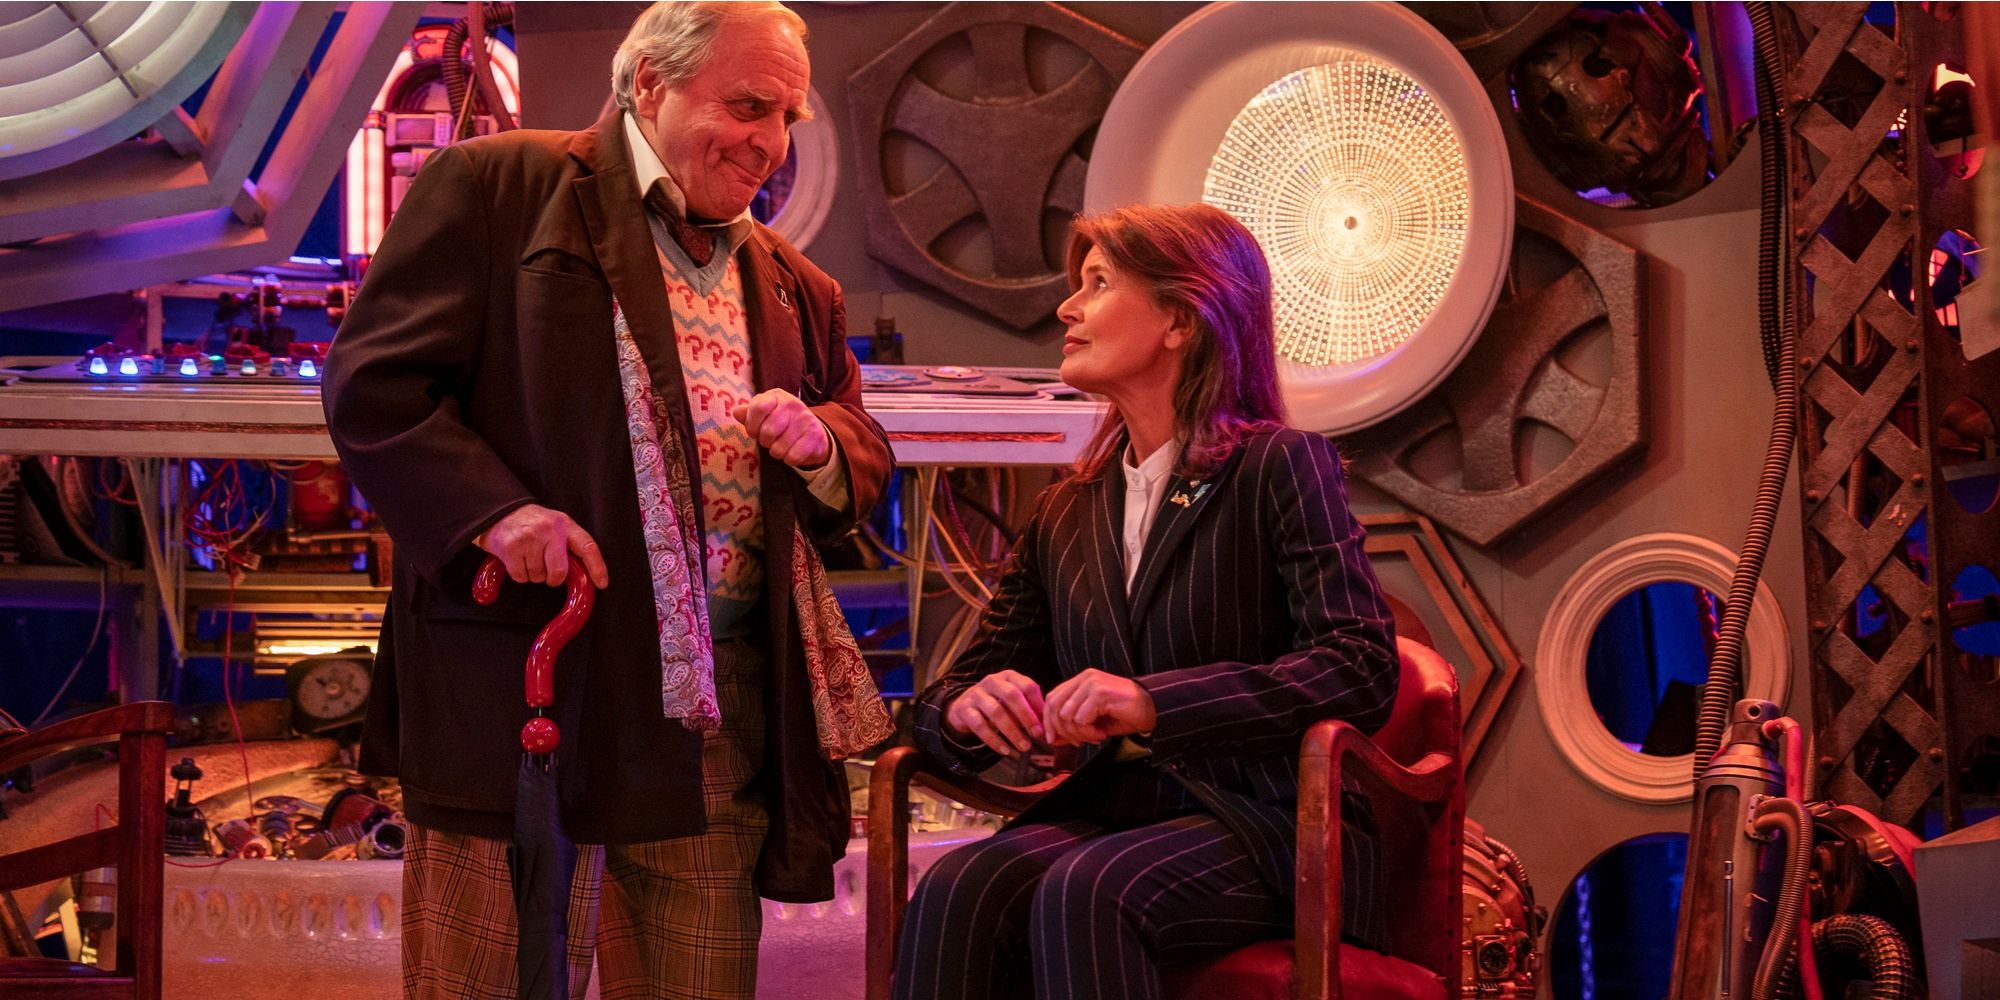 Seventh Doctor standing next to Ace, dressed in a pinstripe suit, sitting in a chair on the Memory Tardis set from Doctor Who Tales of the TARDIS